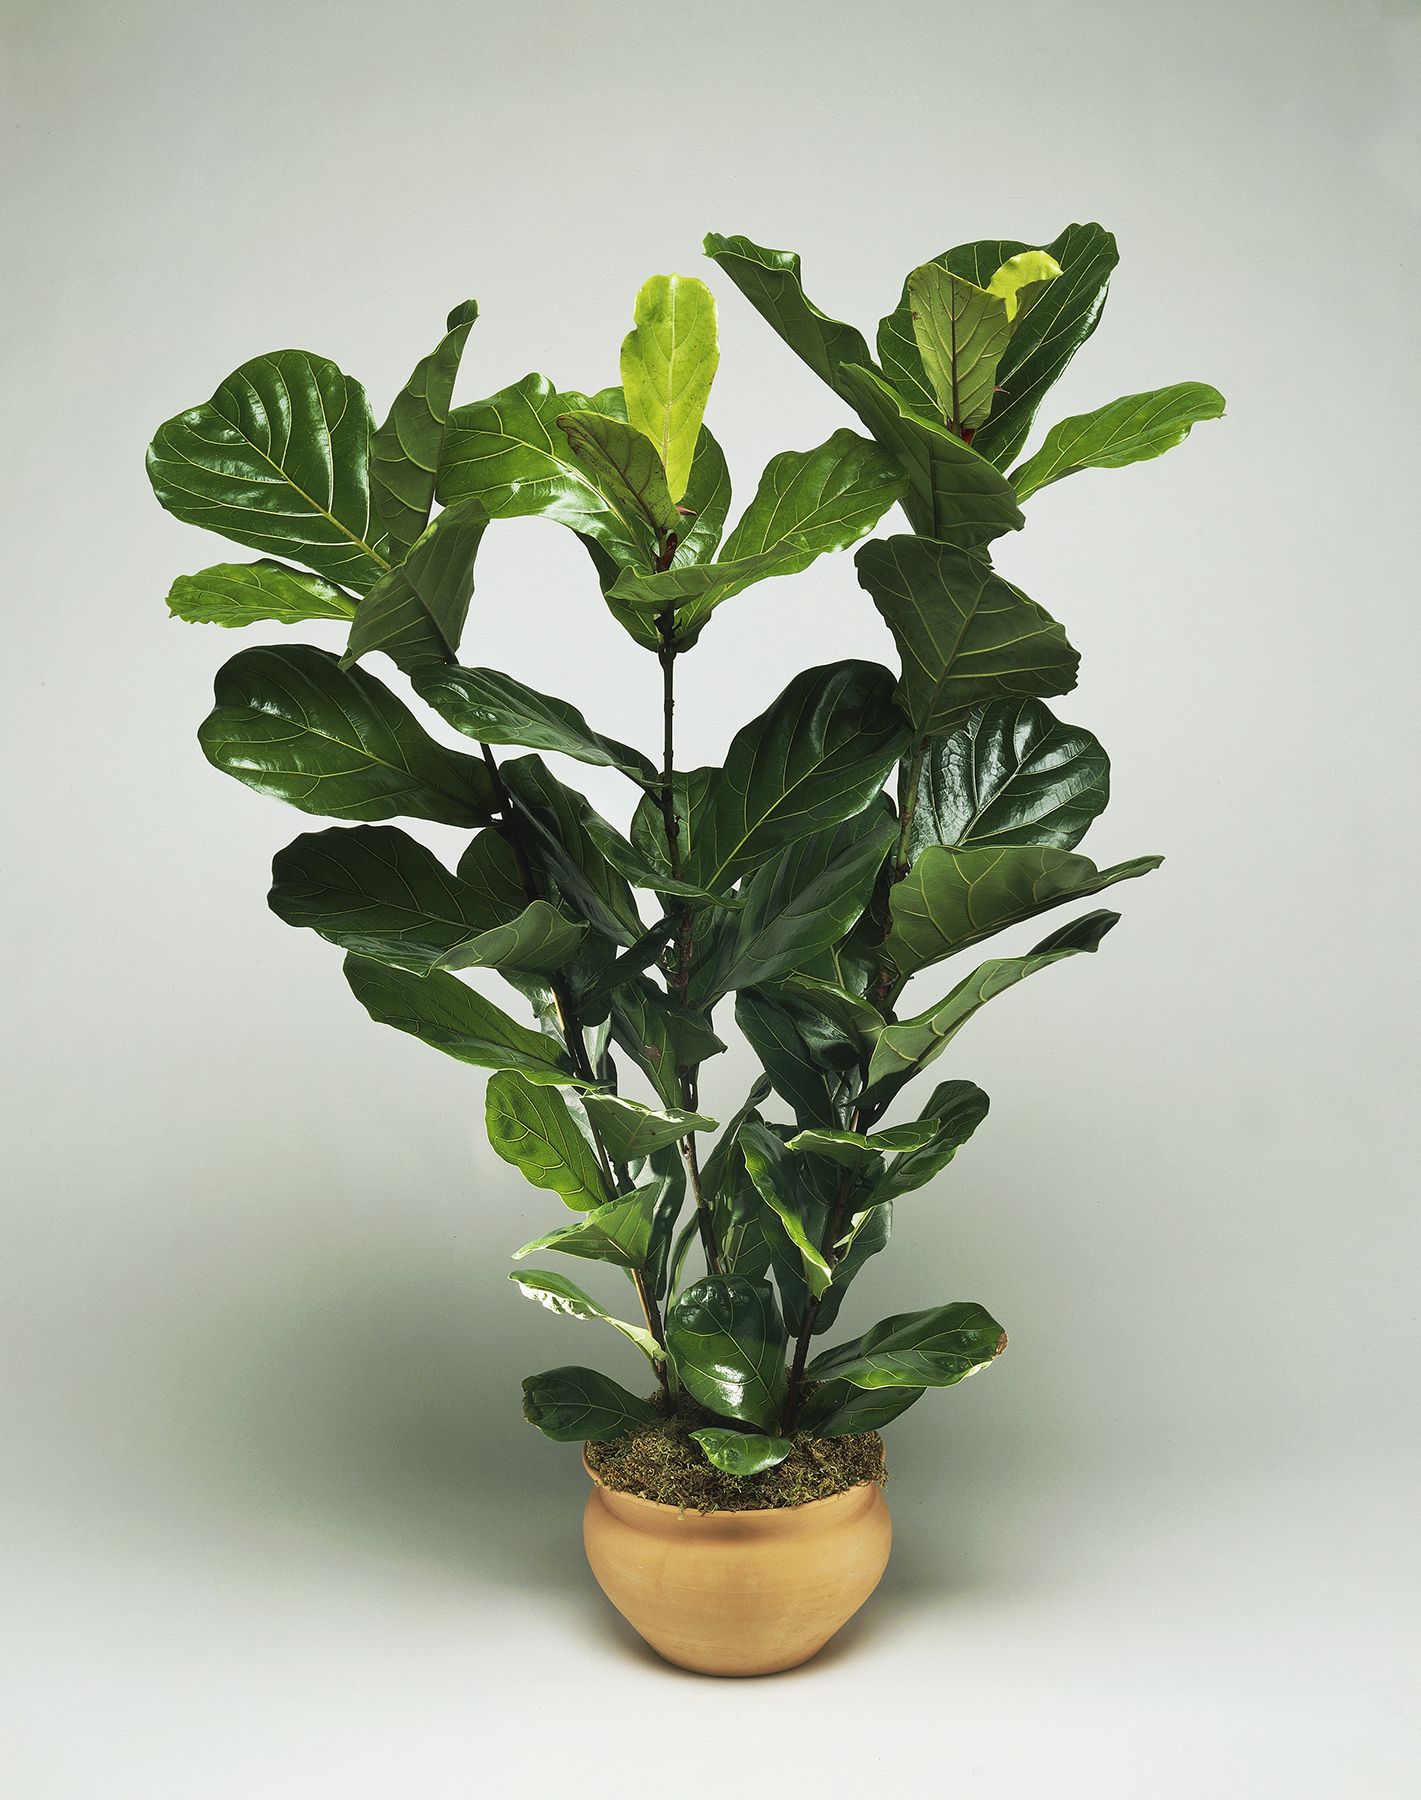 In a Dry Room: Fiddle Leaf Fig Tree